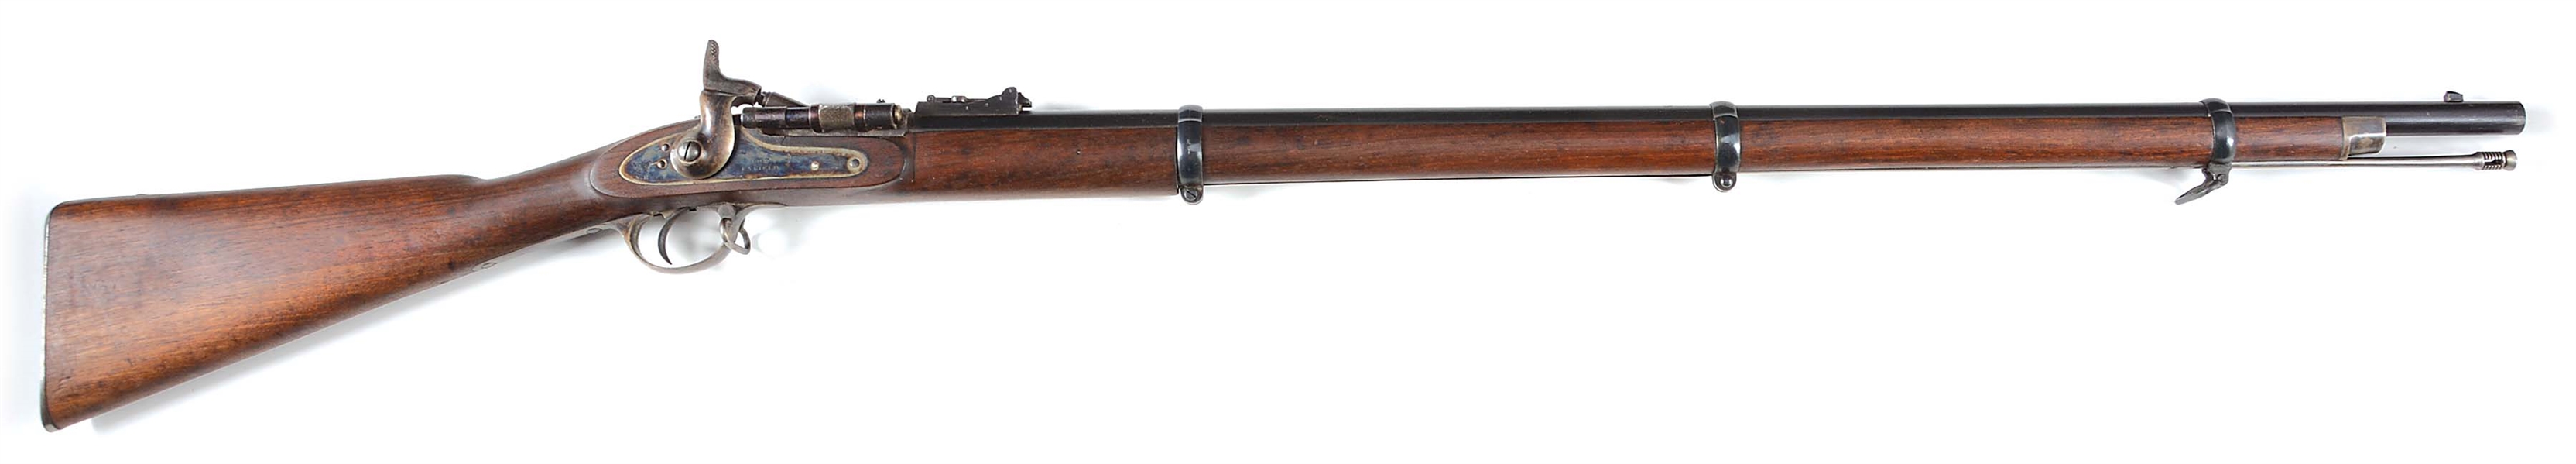 (A) 1860 DATED BRITISH ENFIELD SNIDER CONVERSION BREECHLOADING RIFLE.